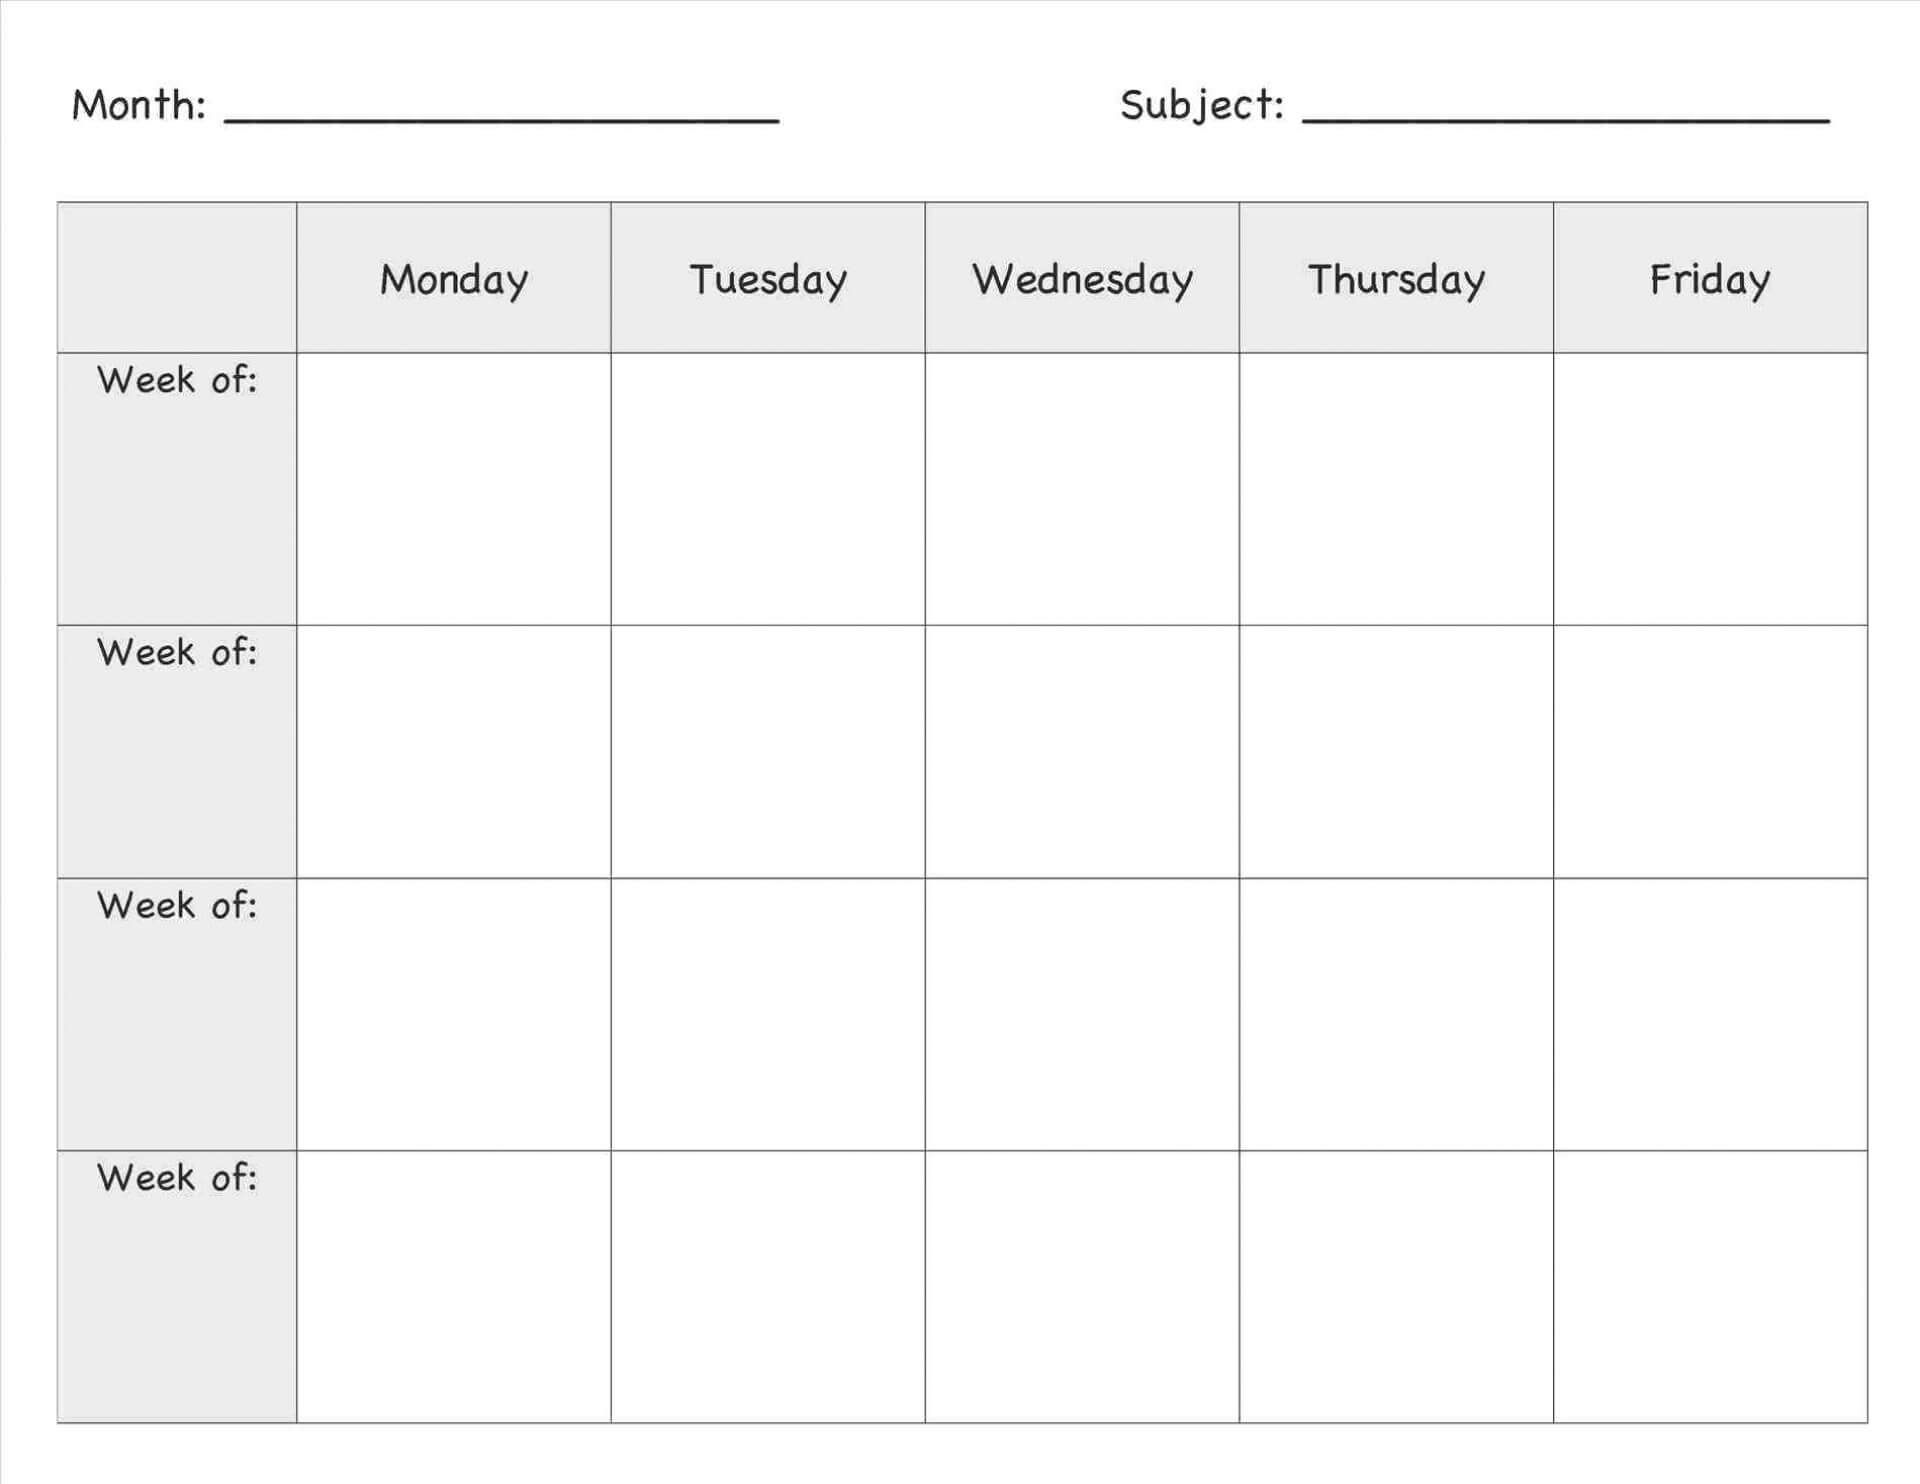 010-weekly-lesson-plan-template-pdf-free-printable-plans-inside-blank